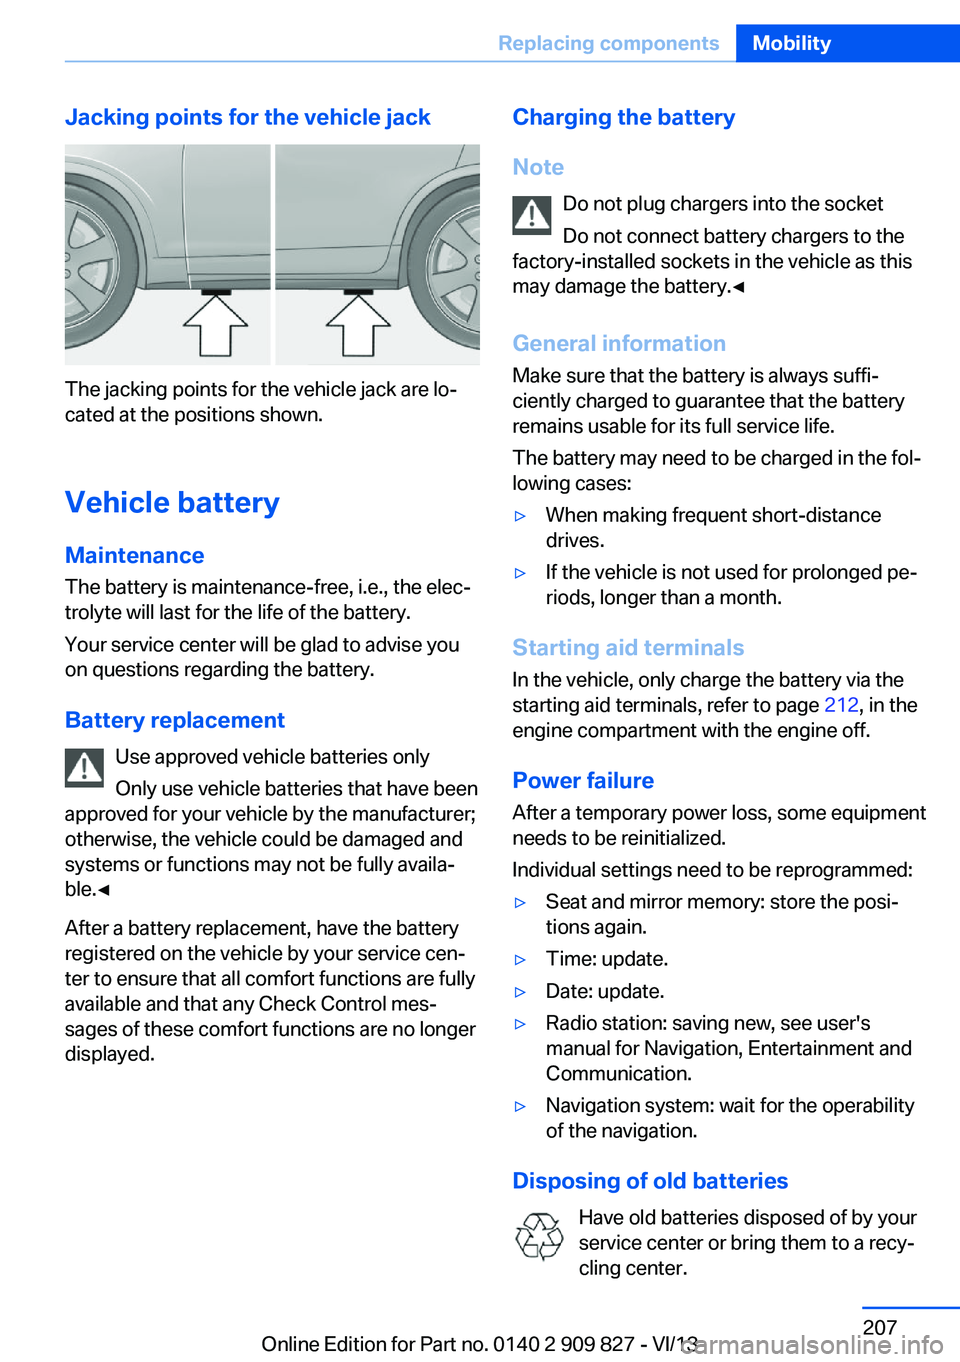 BMW 428I XDRIVE COUPE 2014  Owners Manual Jacking points for the vehicle jack
The jacking points for the vehicle jack are lo‐
cated at the positions shown.
Vehicle battery Maintenance
The battery is maintenance-free, i.e., the elec‐
troly